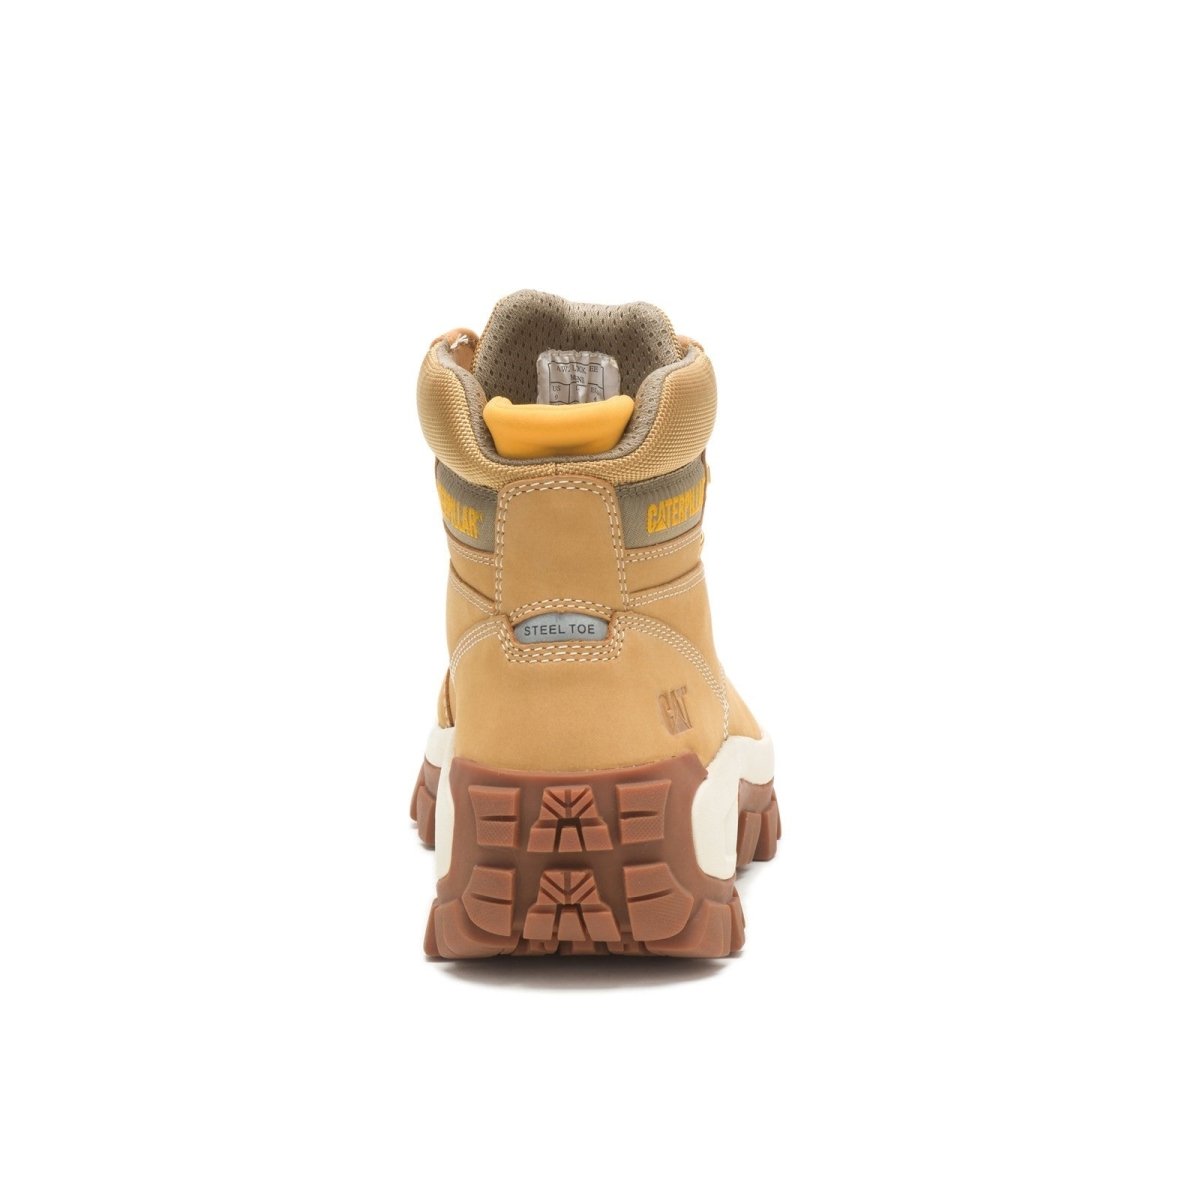 Caterpillar Invader Steel Toe Safety Hiker Boots - Shoe Store Direct